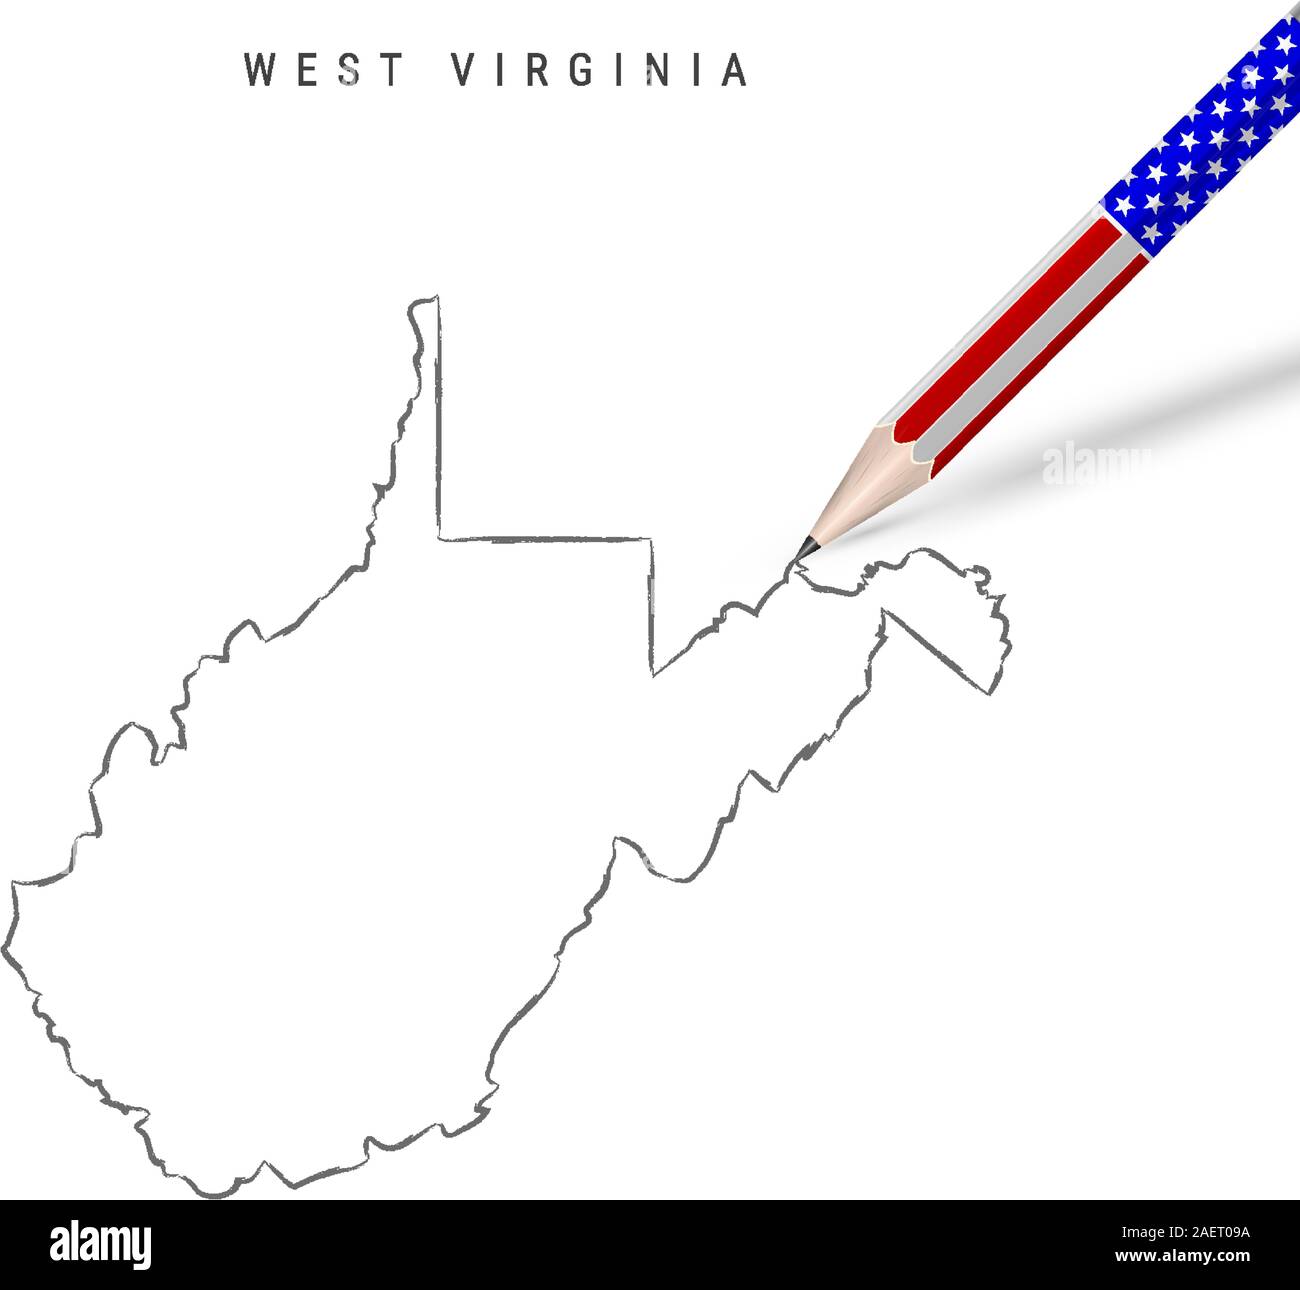 West Virginia US state vector map pencil sketch. West Virginia outline contour map with 3D pencil in american flag colors. Freehand drawing vector, ha Stock Vector